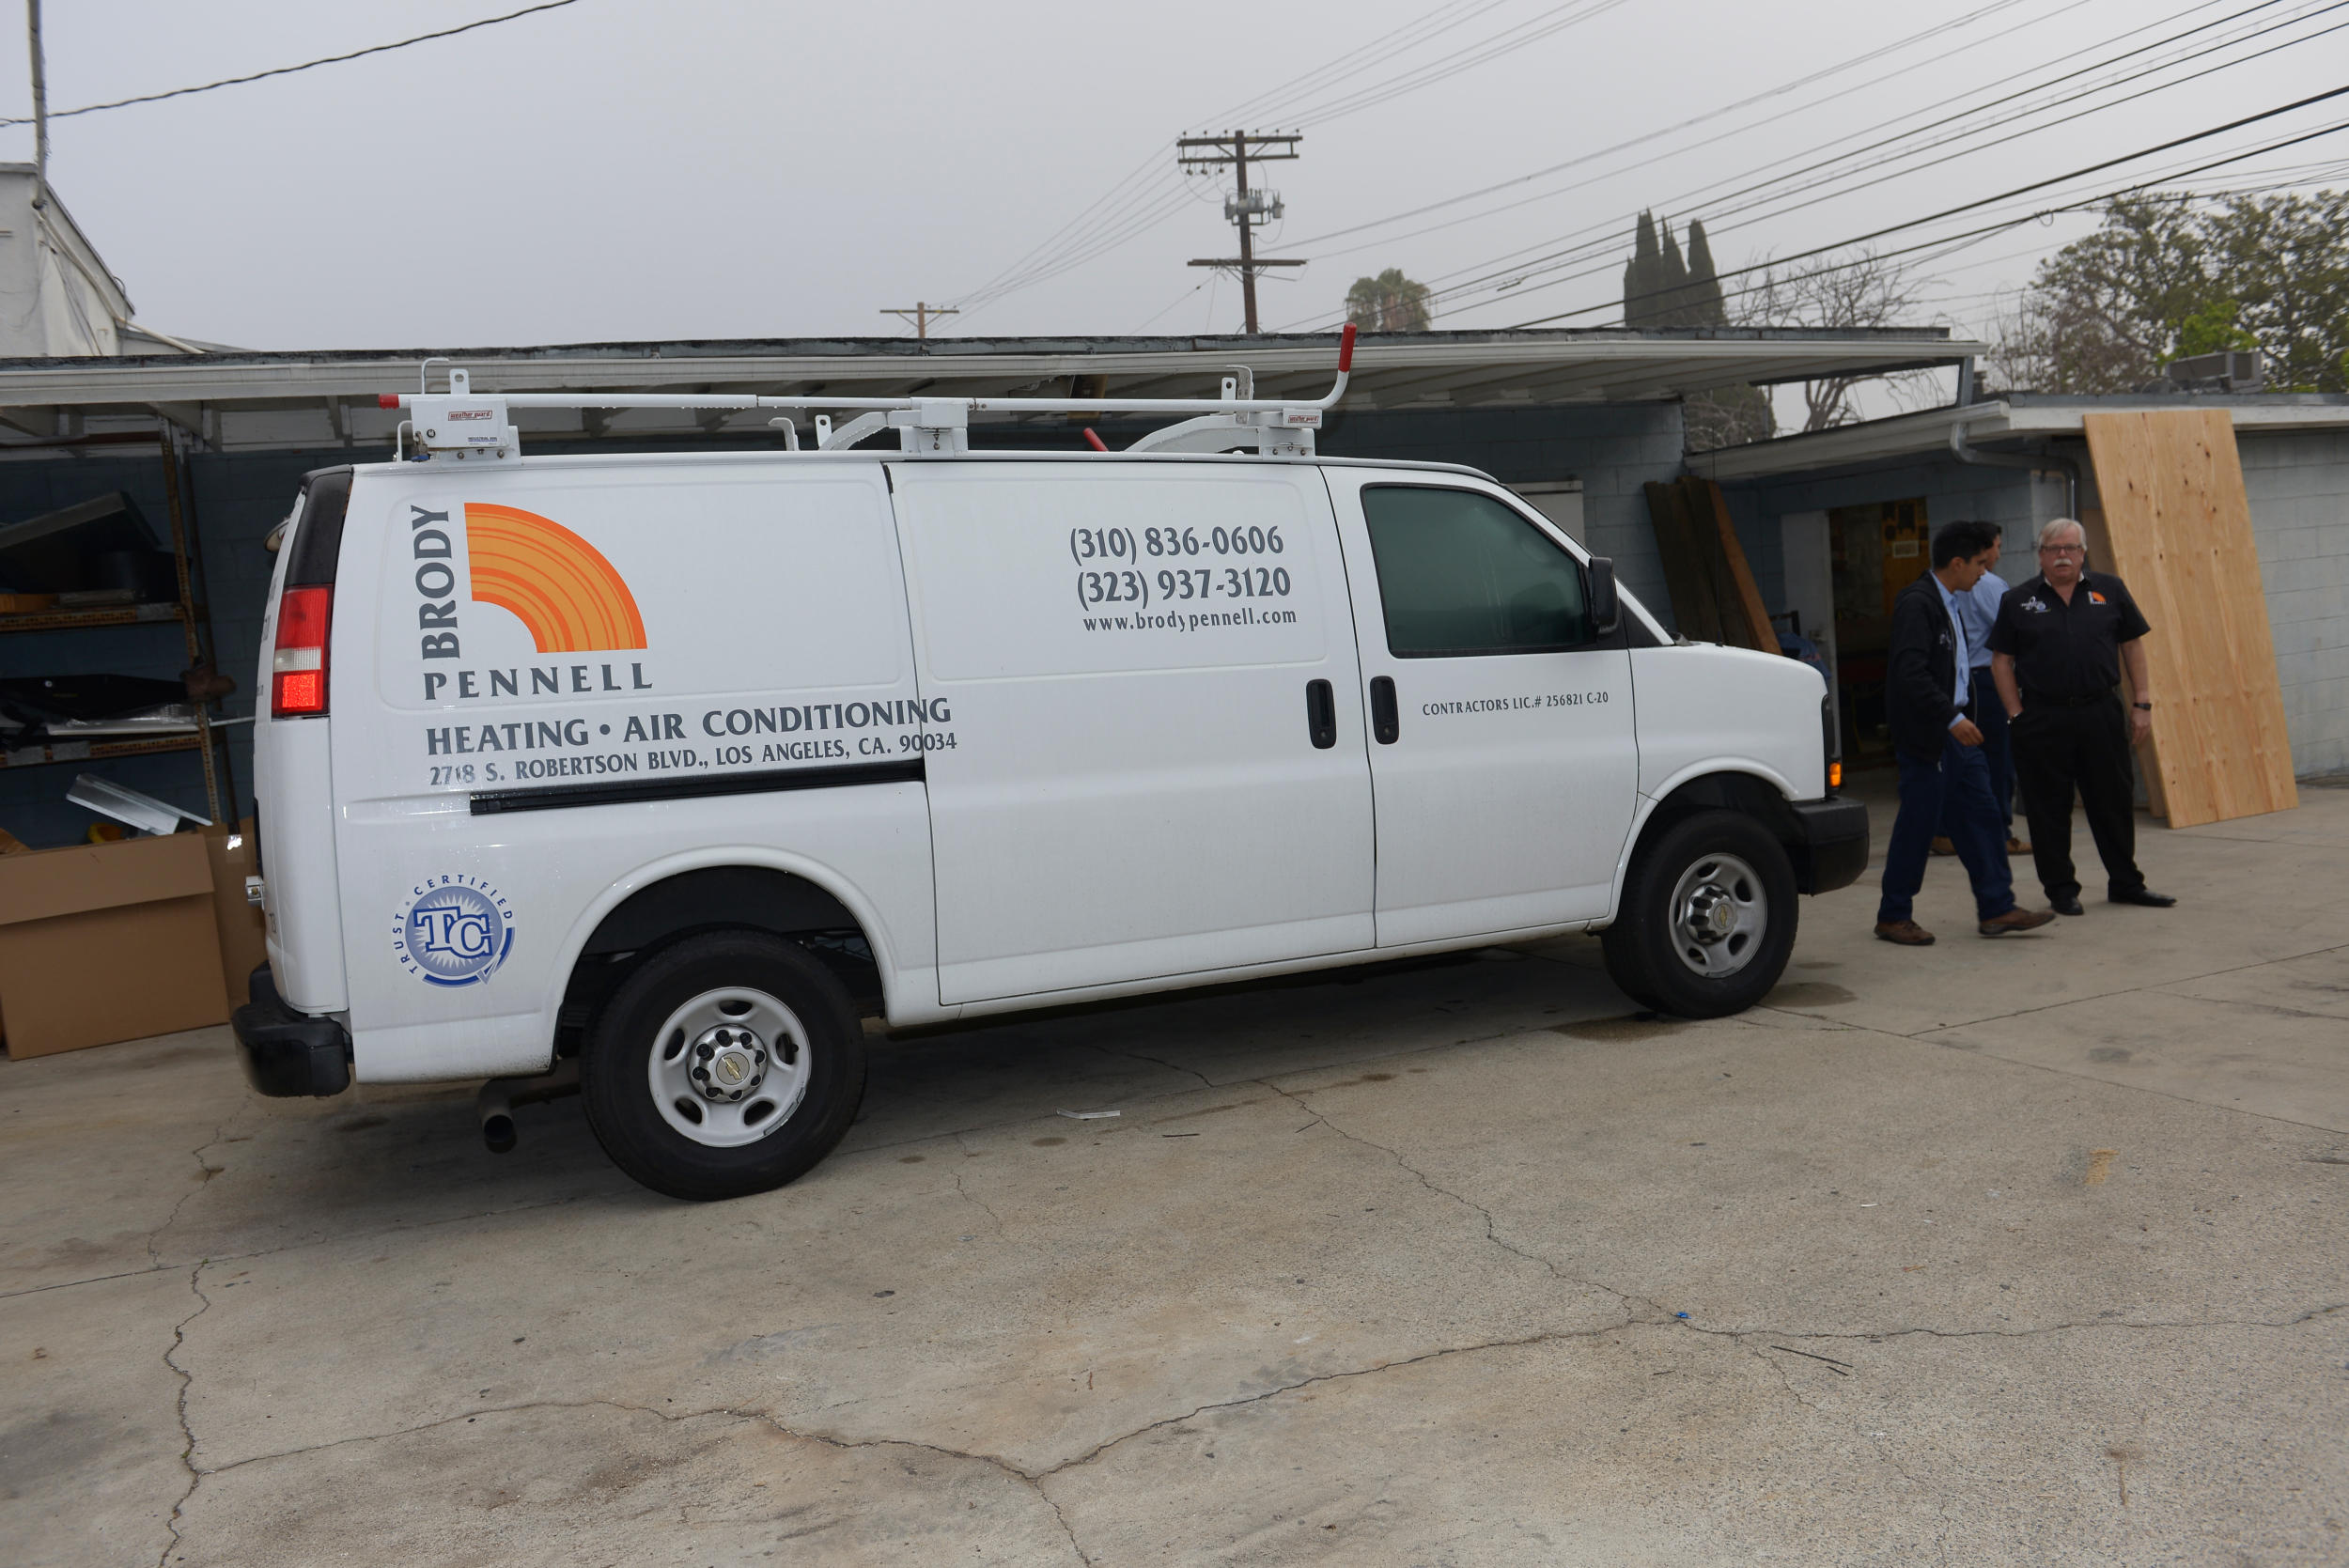 Brody Pennell Heating & Air Conditioning Photo